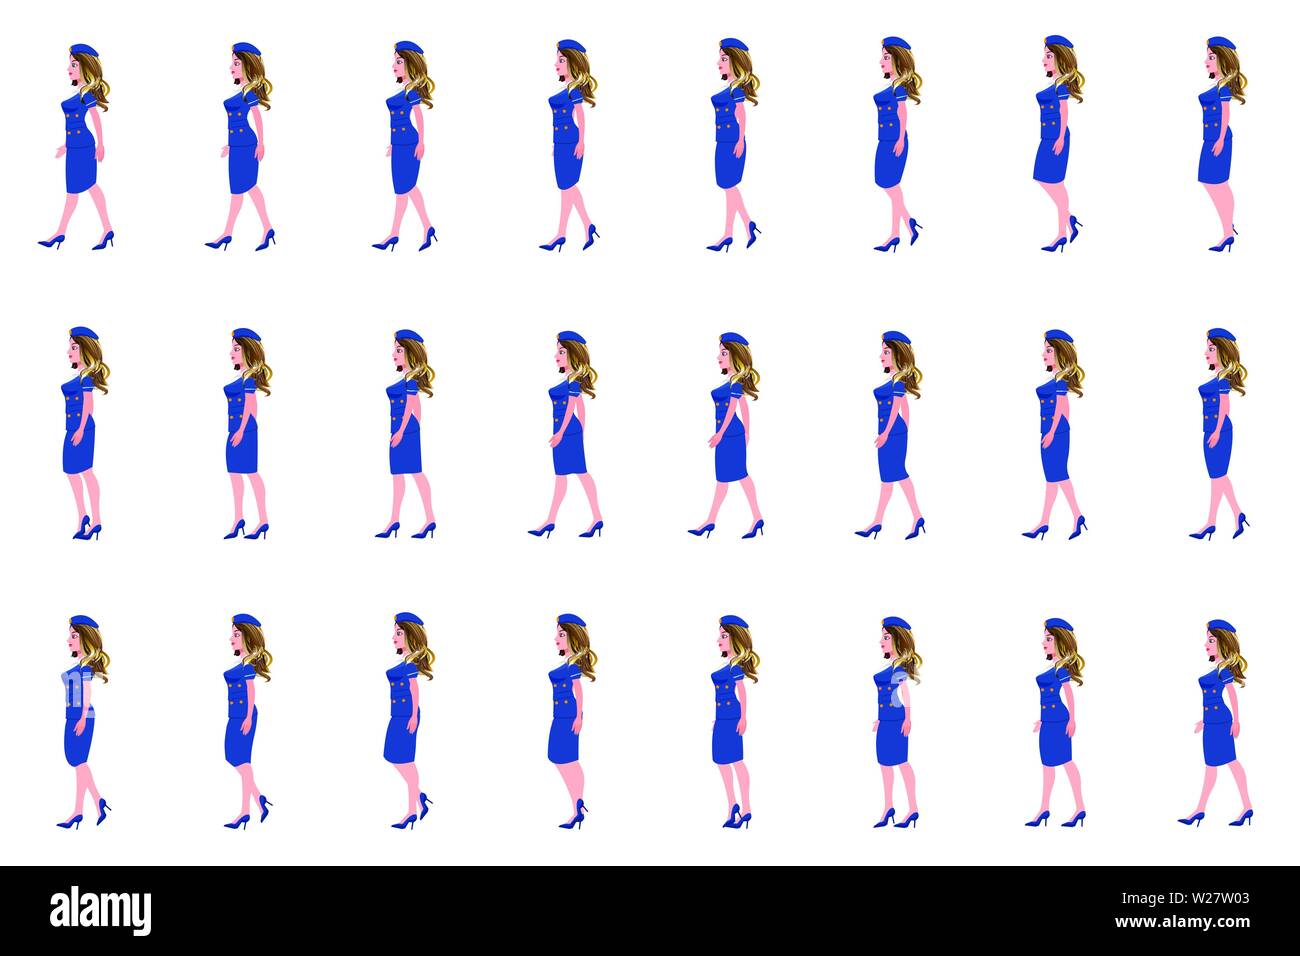 Air Hostess Character Walk Cycle Animation Sequence, Loop Animation Sprite Sheet Stock Vektor